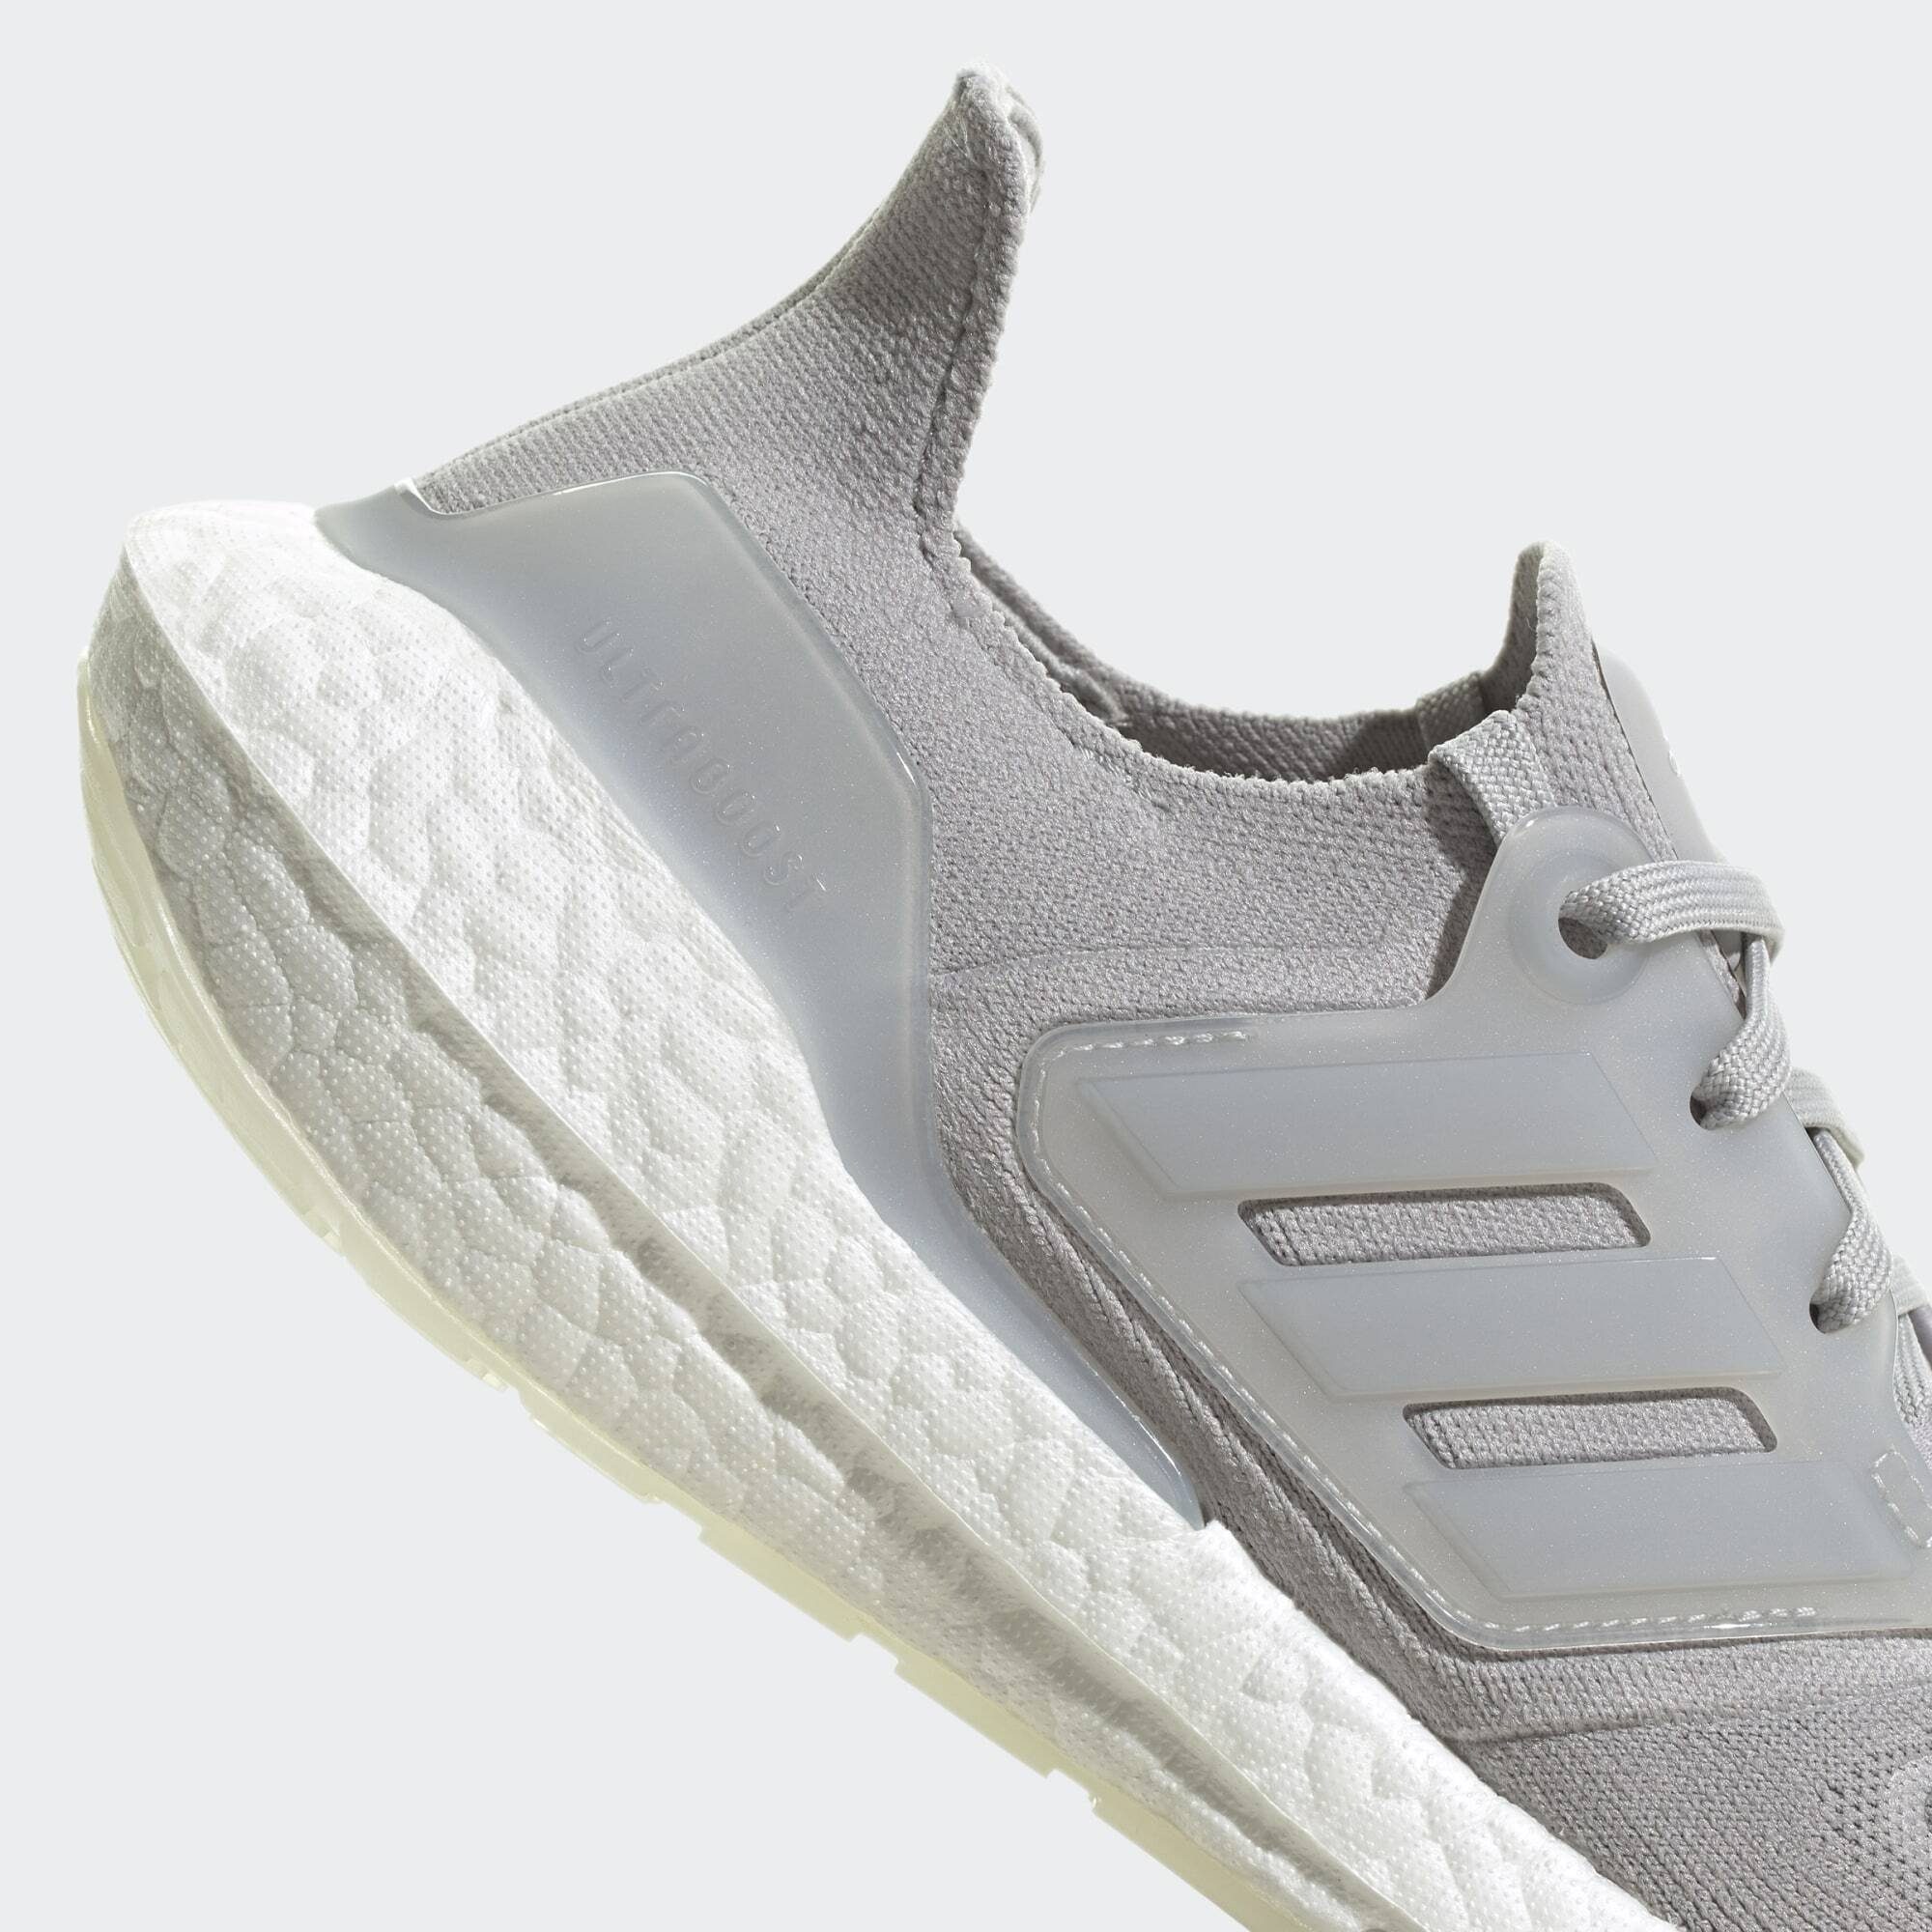 / 22 Two LAUFSCHUH Sneaker Two adidas Two / Grey Grey Grey ULTRABOOST Performance